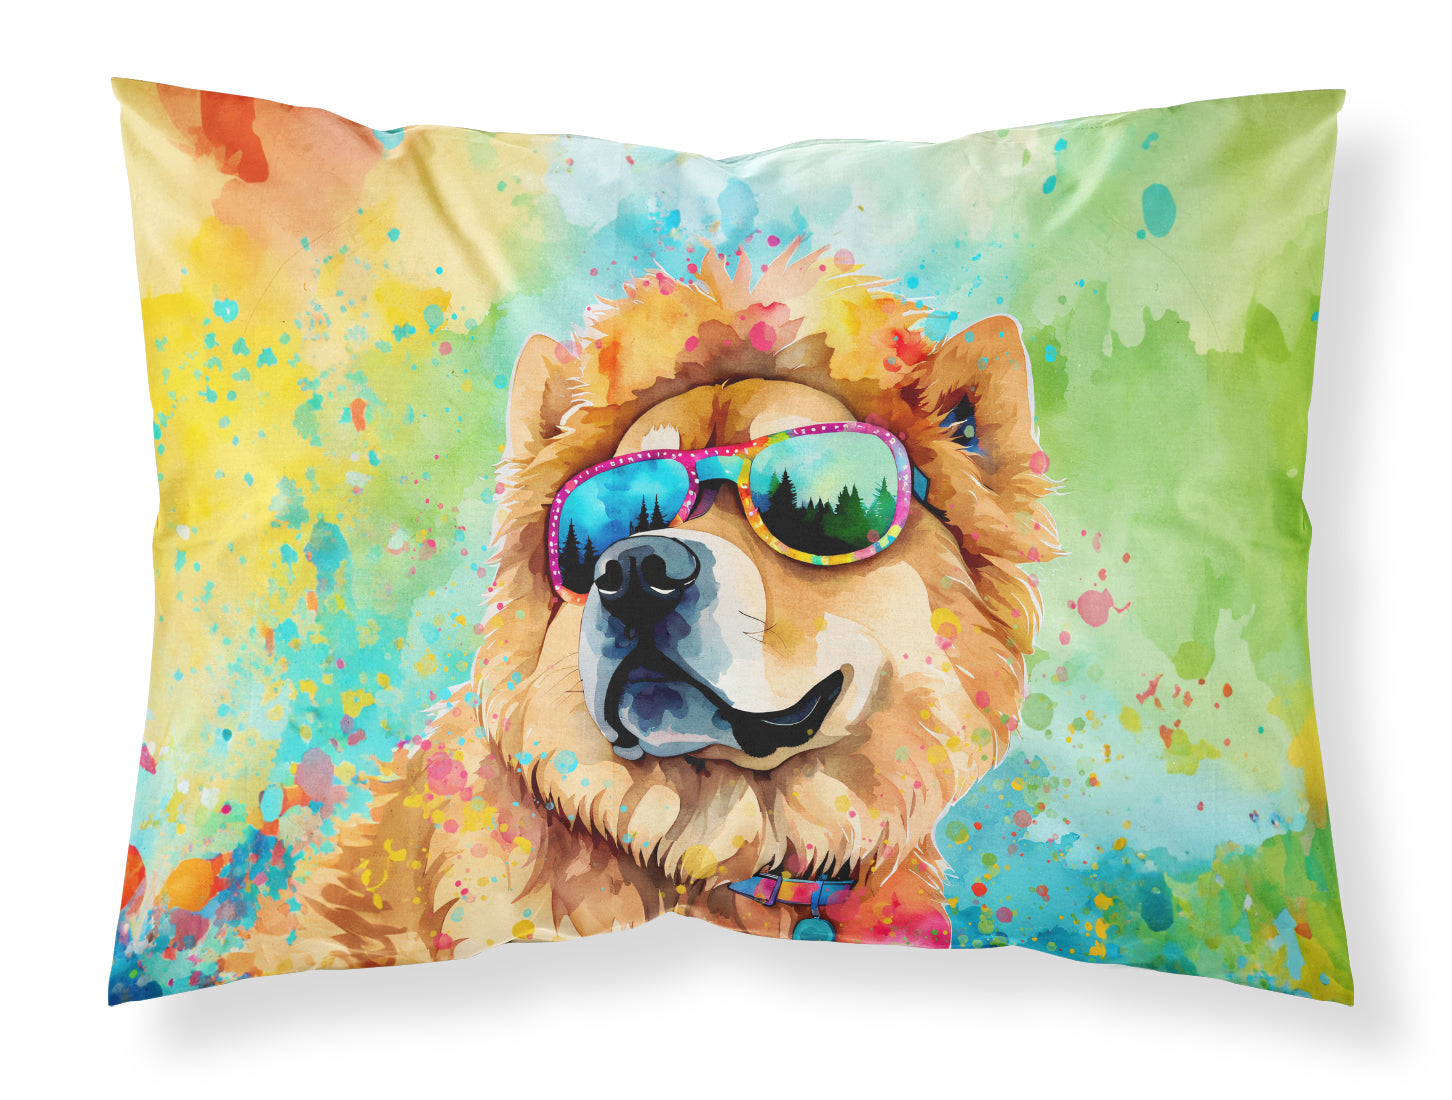 Buy this Chow Chow Hippie Dawg Standard Pillowcase